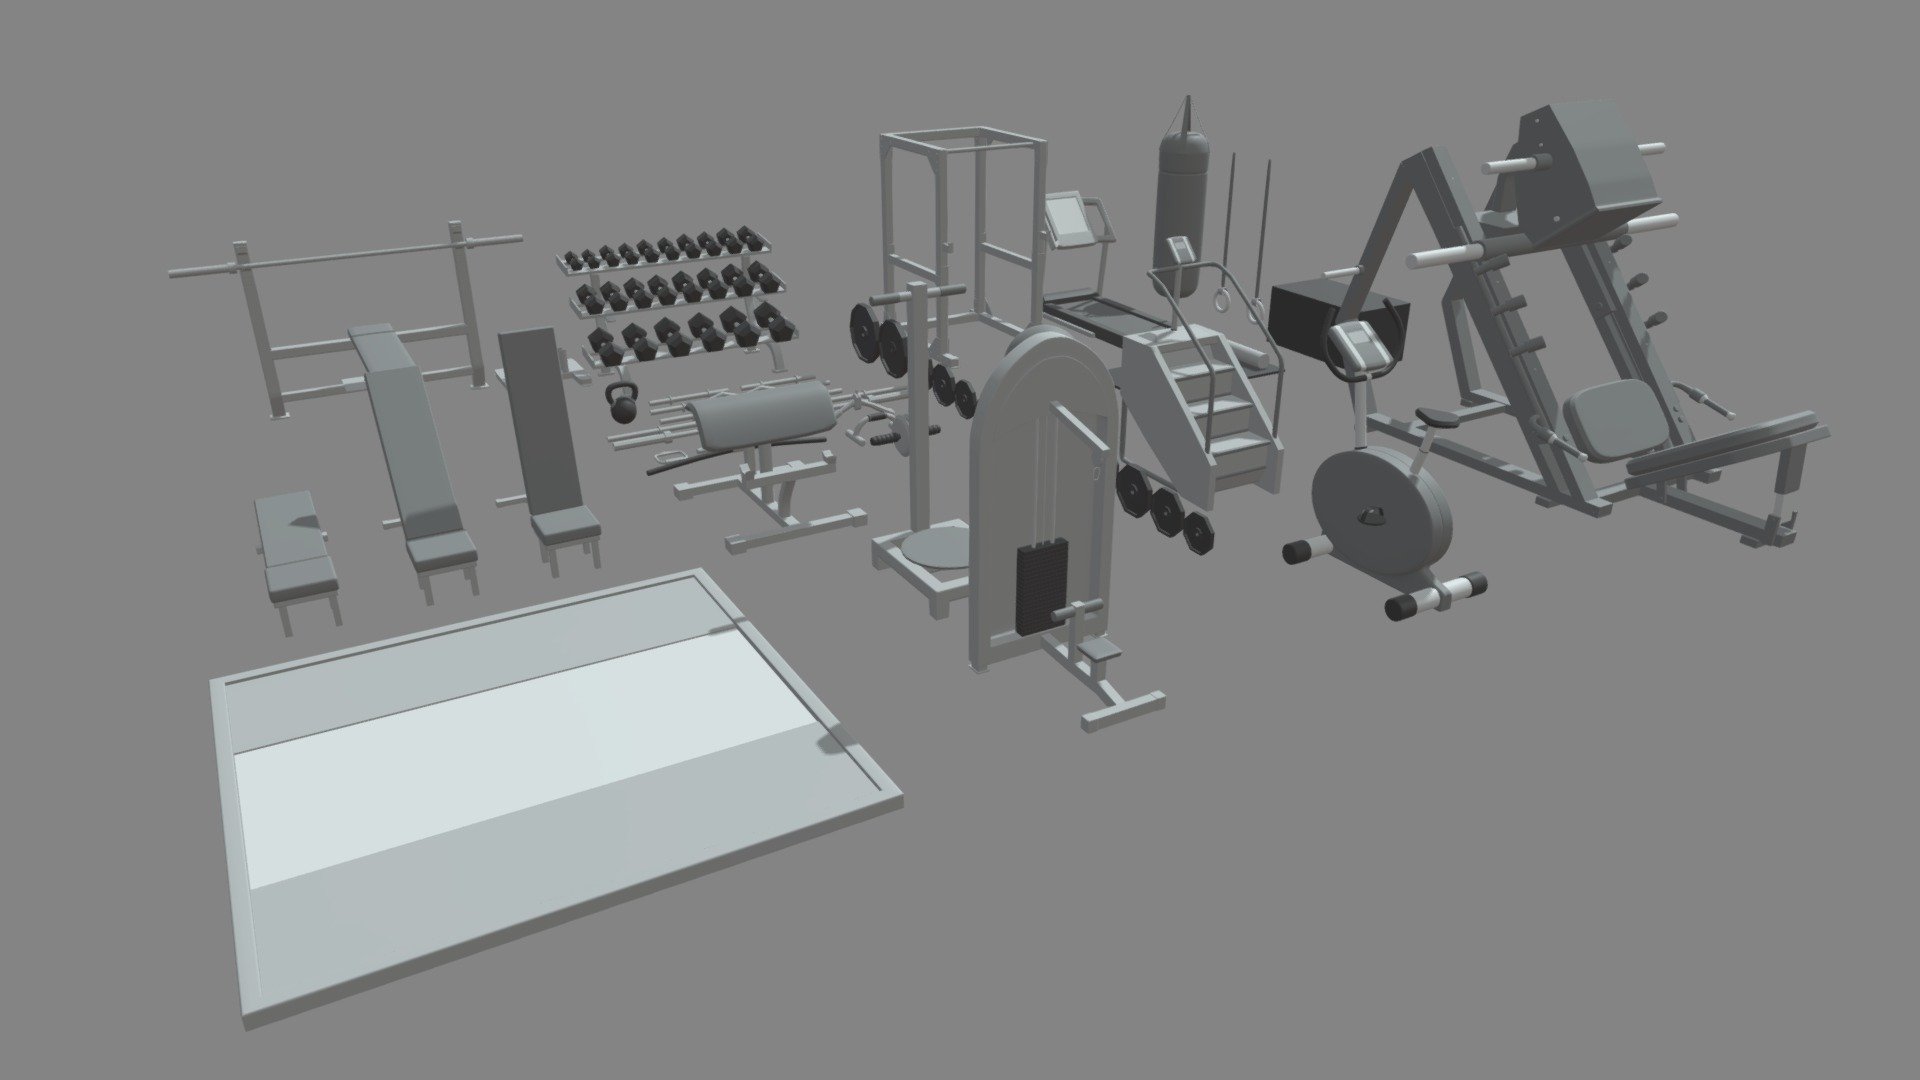 This model contains a Low Poly Gym based on real machines and gym equipments which i modeled in Maya 2018. This model is perfect to create a new great scene with different gym equipment or to create any sportive scenary or bodybuilding scene.

The model is separated in each machine or equipment very well organized in the outliner. There is no UV's, no textures, just materials, black, grey and white materials. If you need the models to be separated or joined contact me.

If you need any kind of help contact me, i will help you with everything i can. If you like the model please give me some feedback, I would appreciate it.

Don’t doubt on contacting me, i would be very happy to help. If you experience any kind of difficulties, be sure to contact me and i will help you. Sincerely Yours, ViperJr3D - Low Poly Gym - Buy Royalty Free 3D model by ViperJr3D 3d model